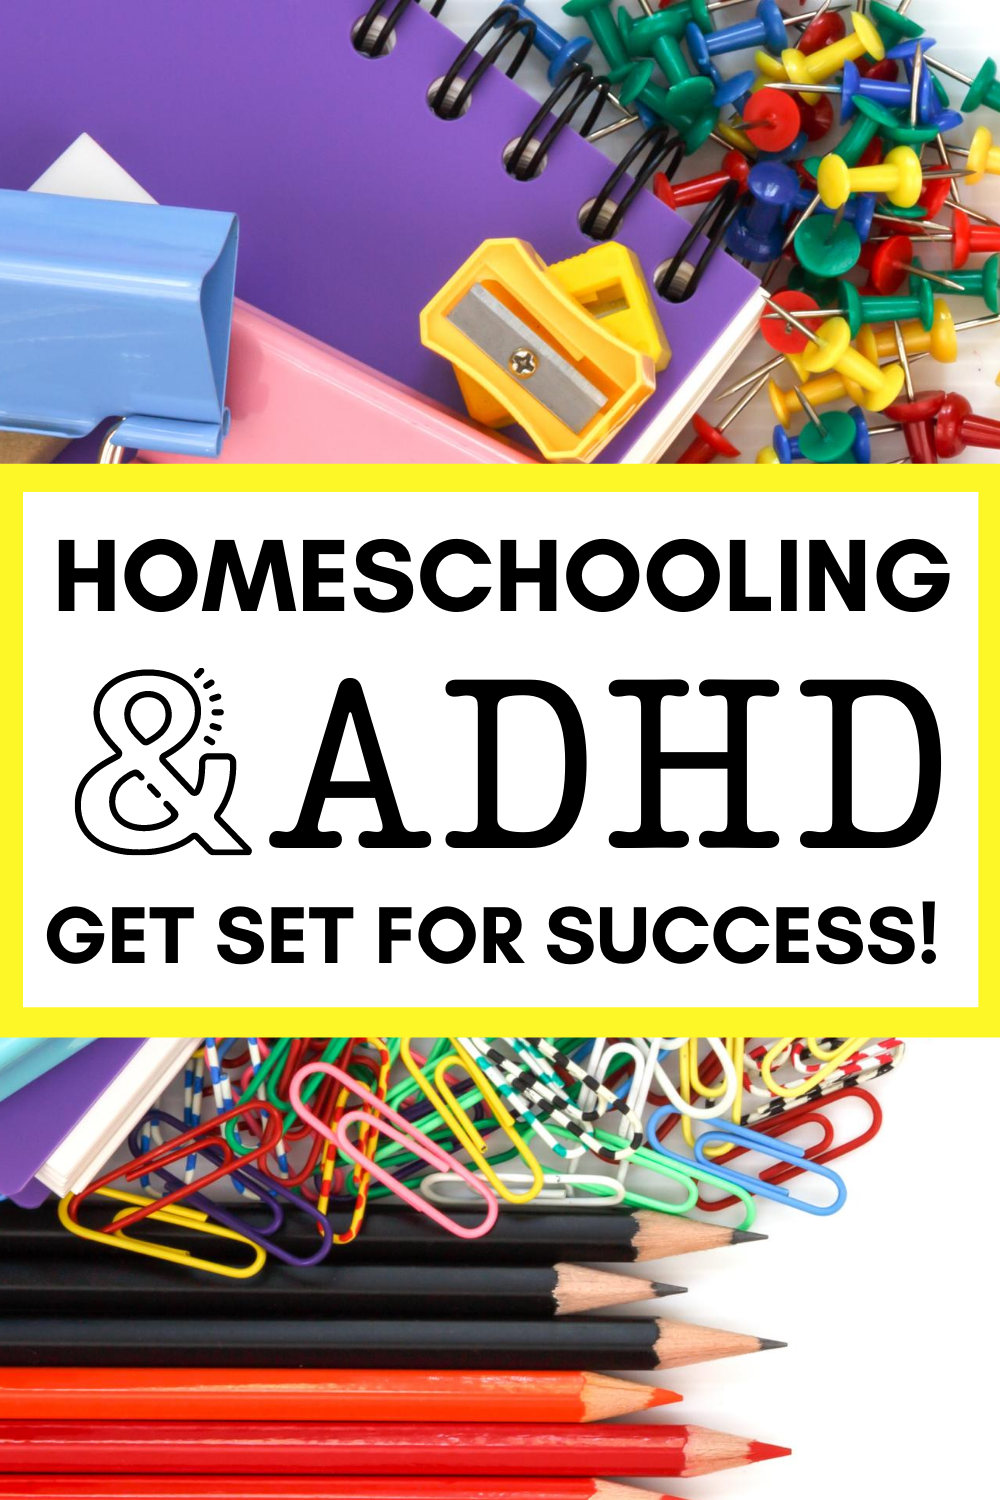 Do you have a child homeschooling with ADHD? Set yourself up for success with a few simple ideas that make homeschooling SO much easier for you and your child! #adhd #homeschooling #expertadvice #teachingadhd #education